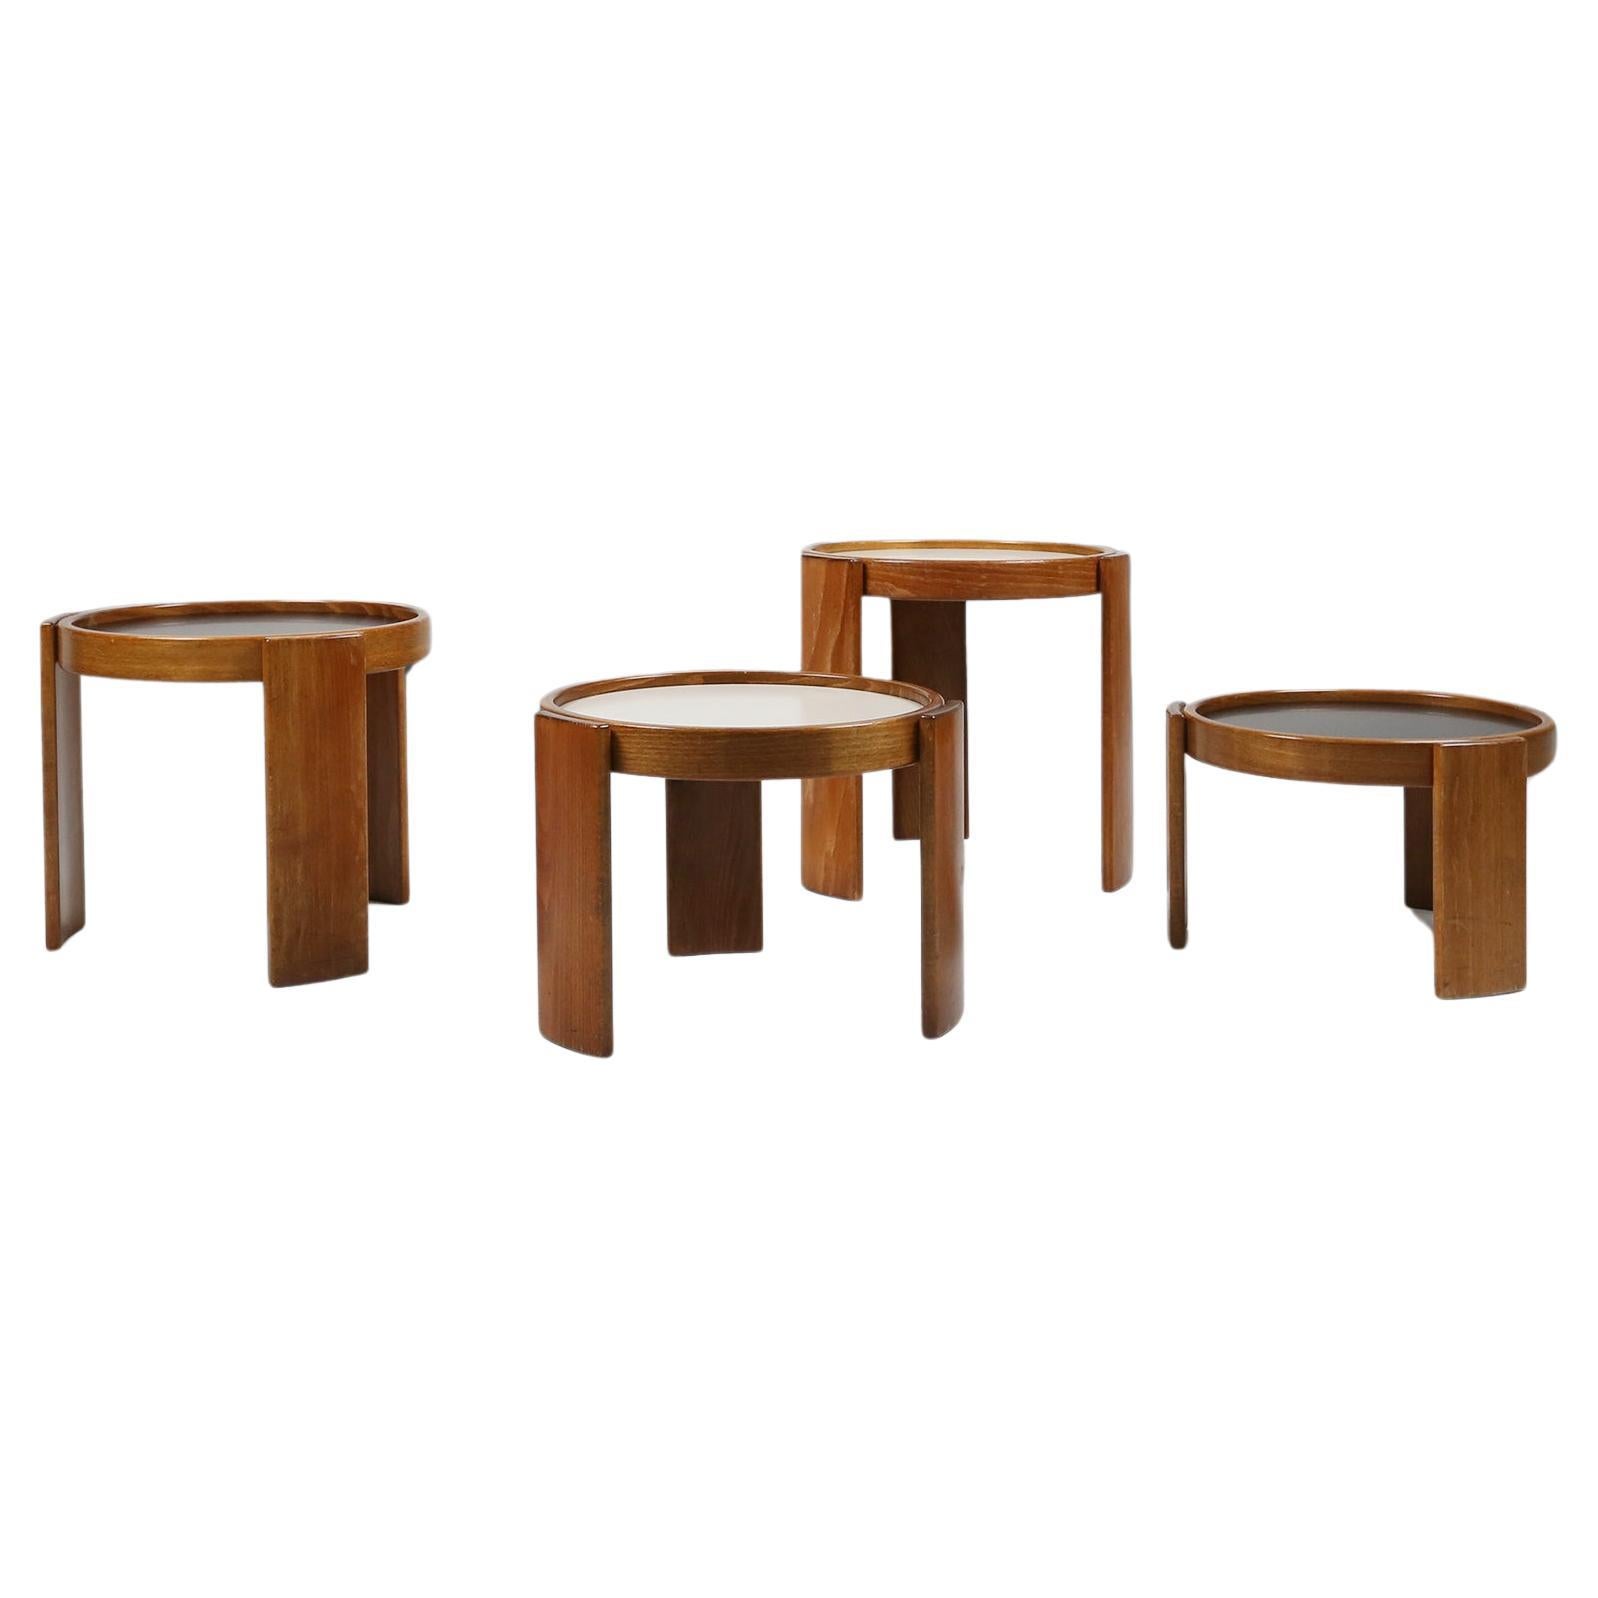 Gianfranco Frattini for Casina, Italy, 1966, early edition wooden nesting tables